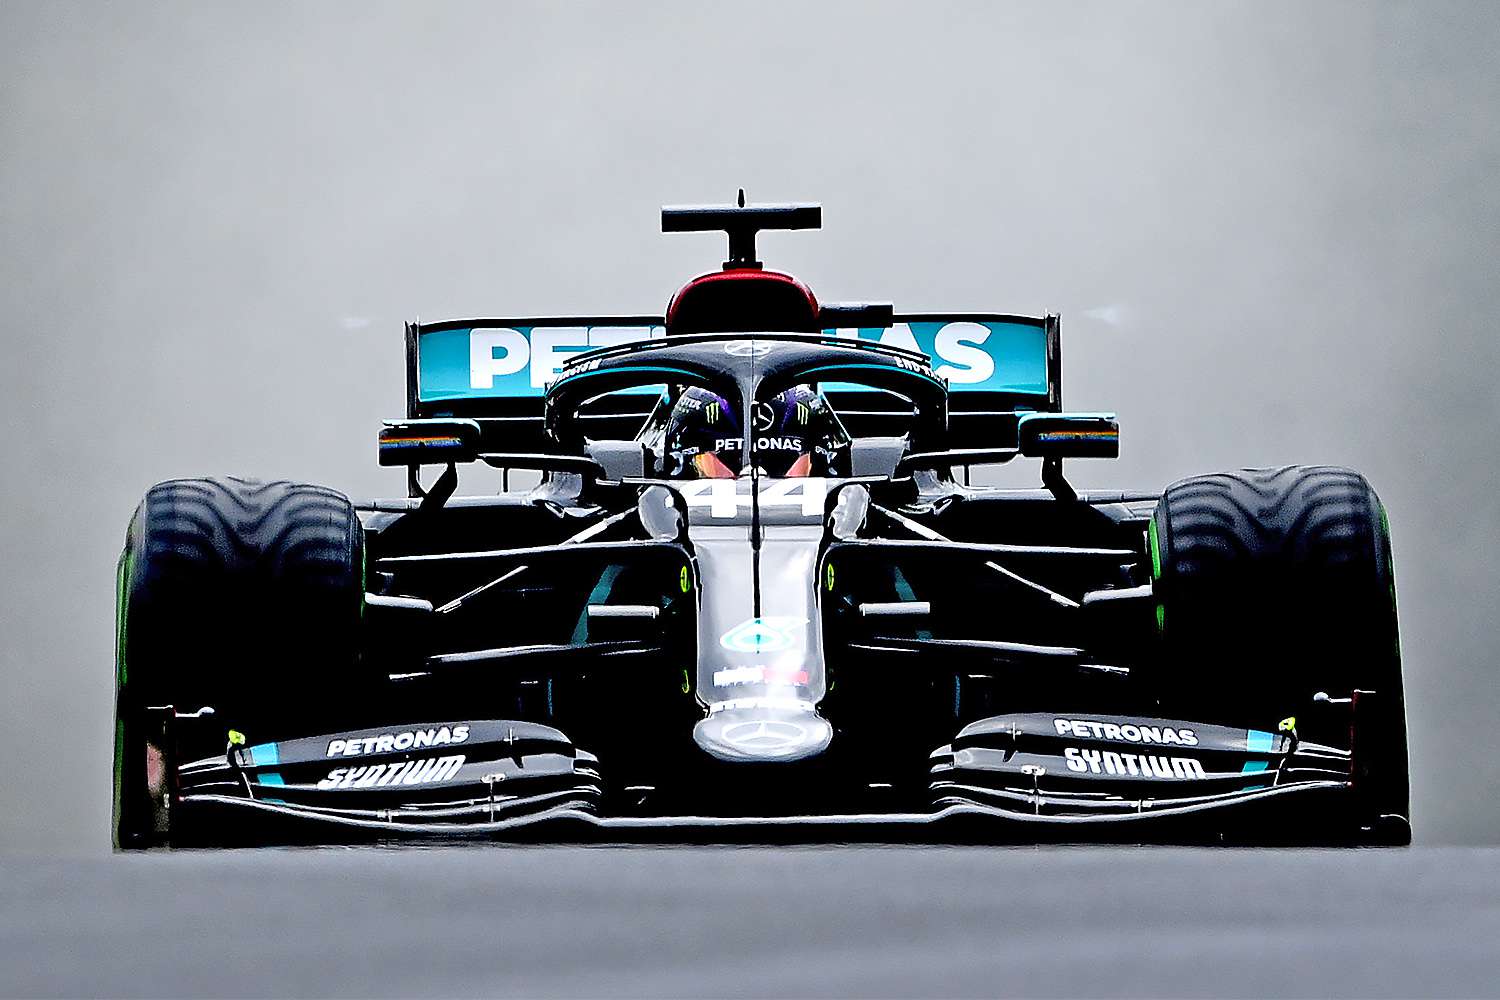 BUDAPEST, HUNGARY - JULY 19: Lewis Hamilton of Great Britain driving the (44) Mercedes AMG Petronas F1 Team Mercedes W11 drives on the way to the grid before the Formula One Grand Prix of Hungary at Hungaroring on July 19, 2020 in Budapest, Hungary. (Photo by Clive Mason - Formula 1/Formula 1 via Getty Images)